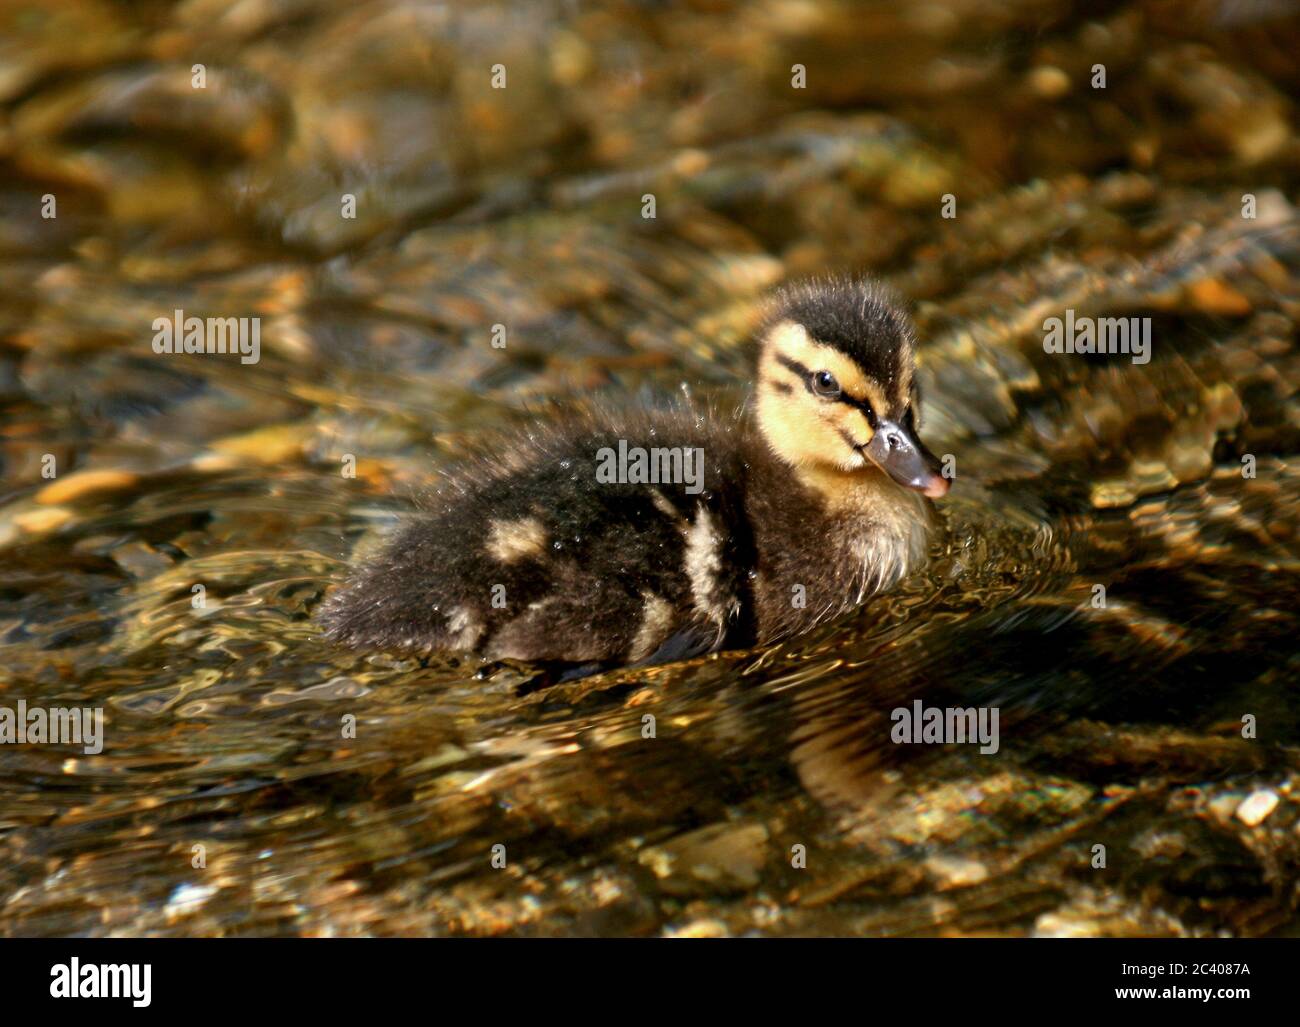 A cute newborn duckling swims on the River Arle, New Alresford, England. Stock Photo